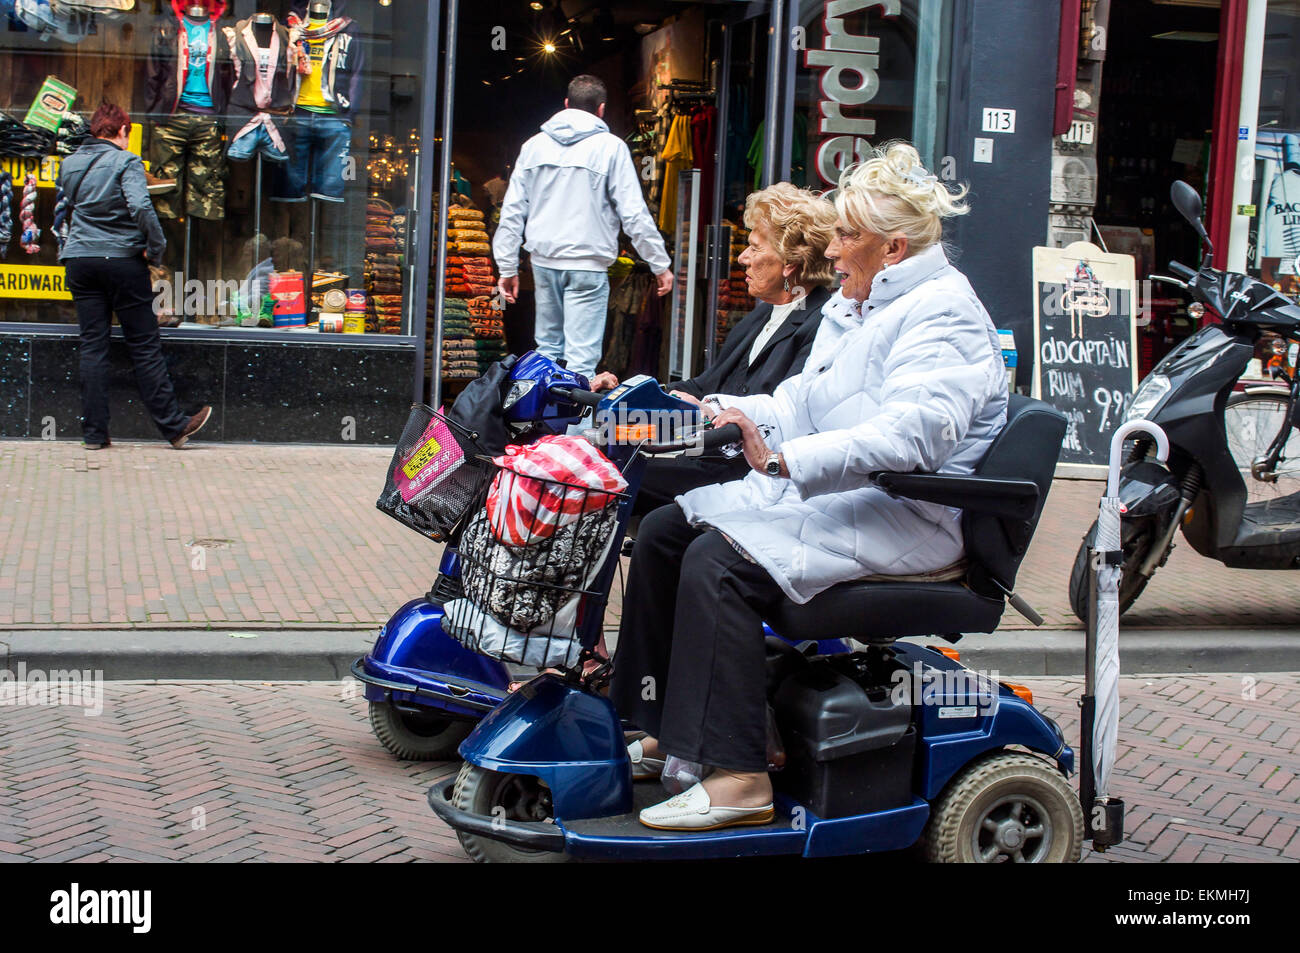 Elderly zooming grannies on mobility scooters ride rather quickly through pedestrian shopping street in Rotterdam, Netherlands. Stock Photo